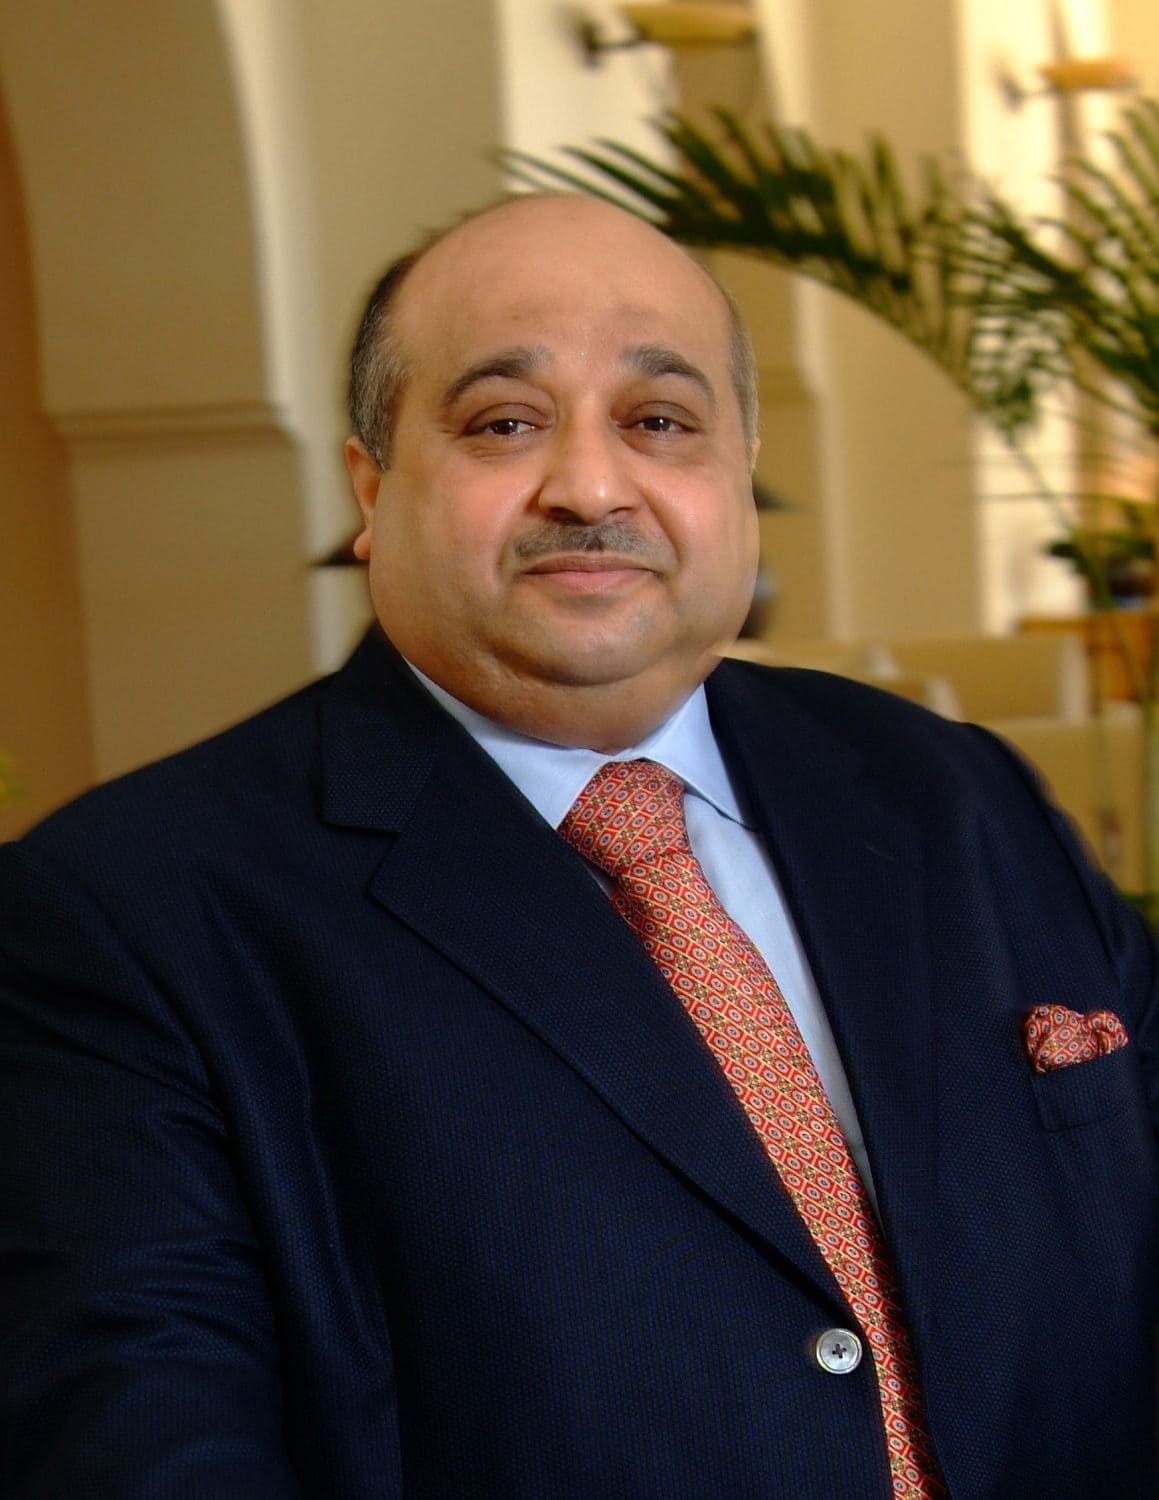 Mohamed Bin Issa Al-Jaber, a prominent Saudi businessman, has established himself as a reputable investor in the financial industry.